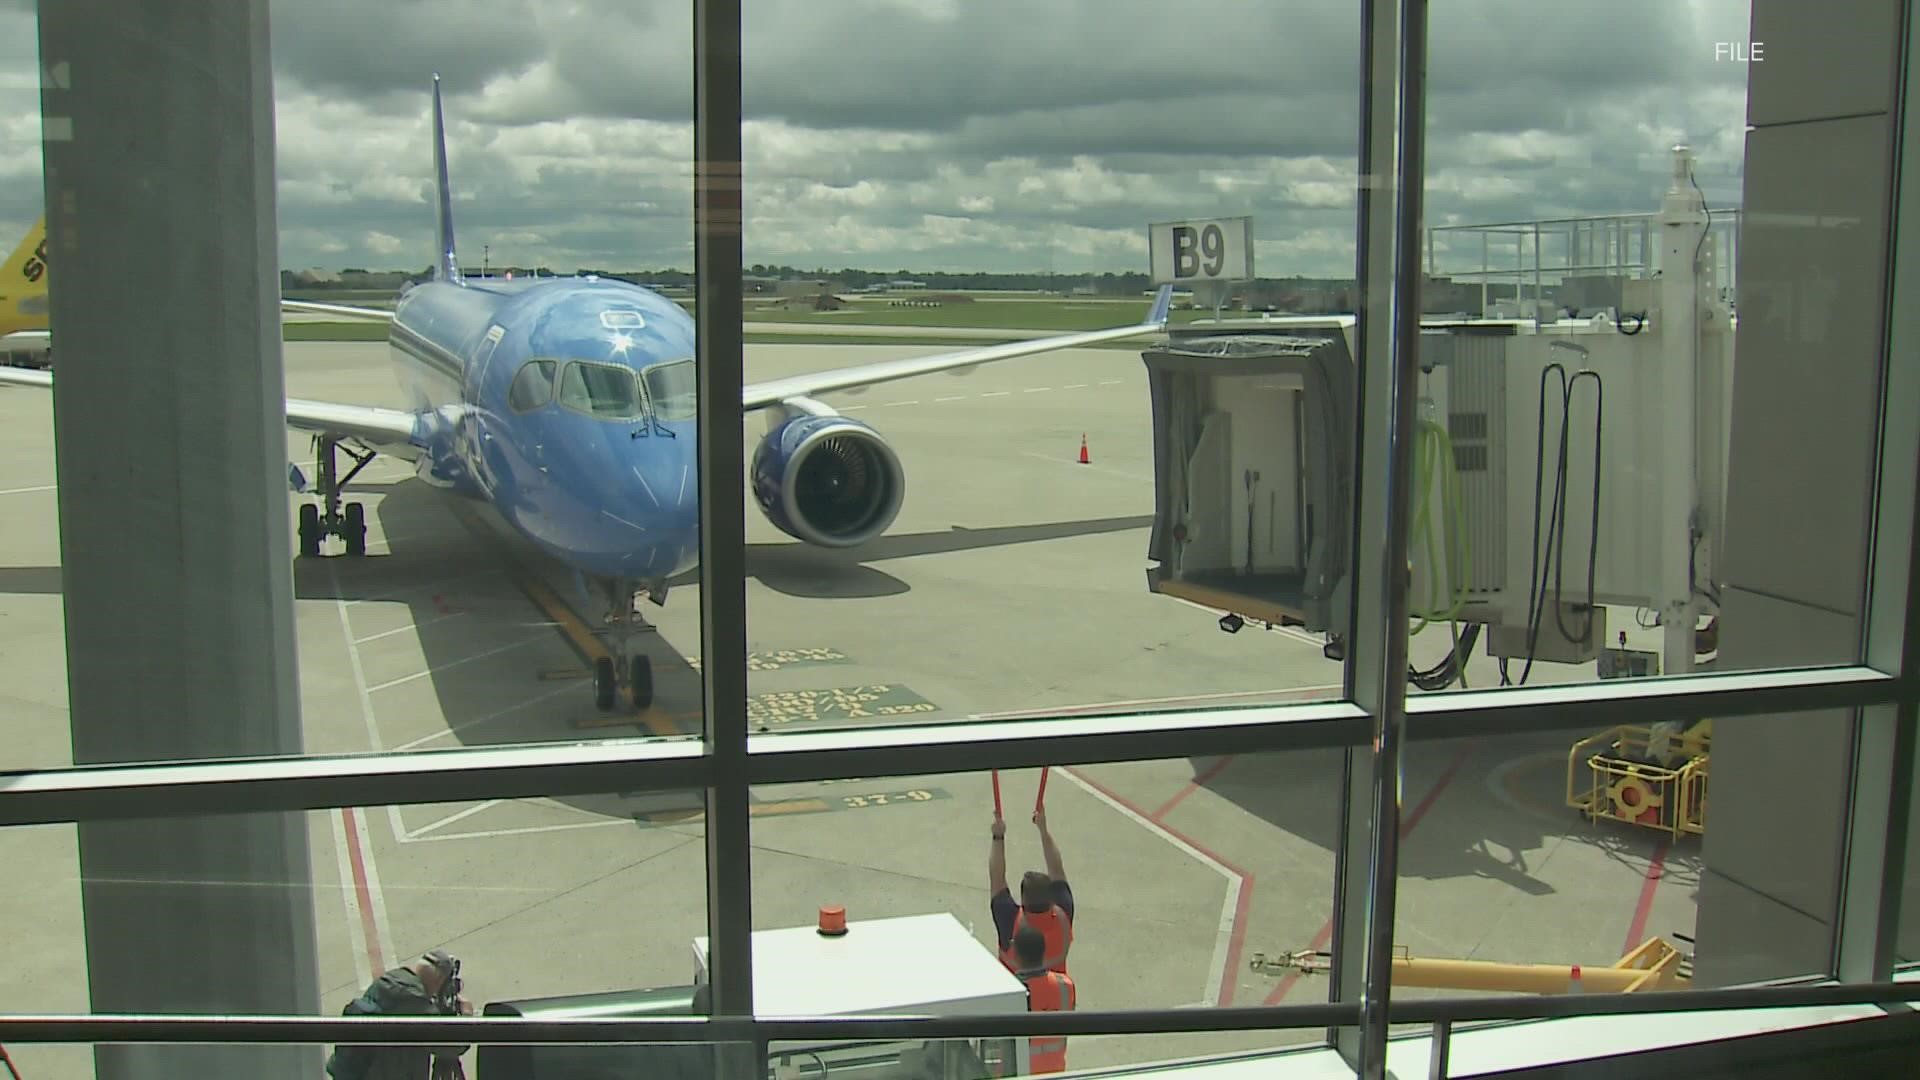 $20 million will go to drilling geothermal wells around the airport to reduce carbon emissions.